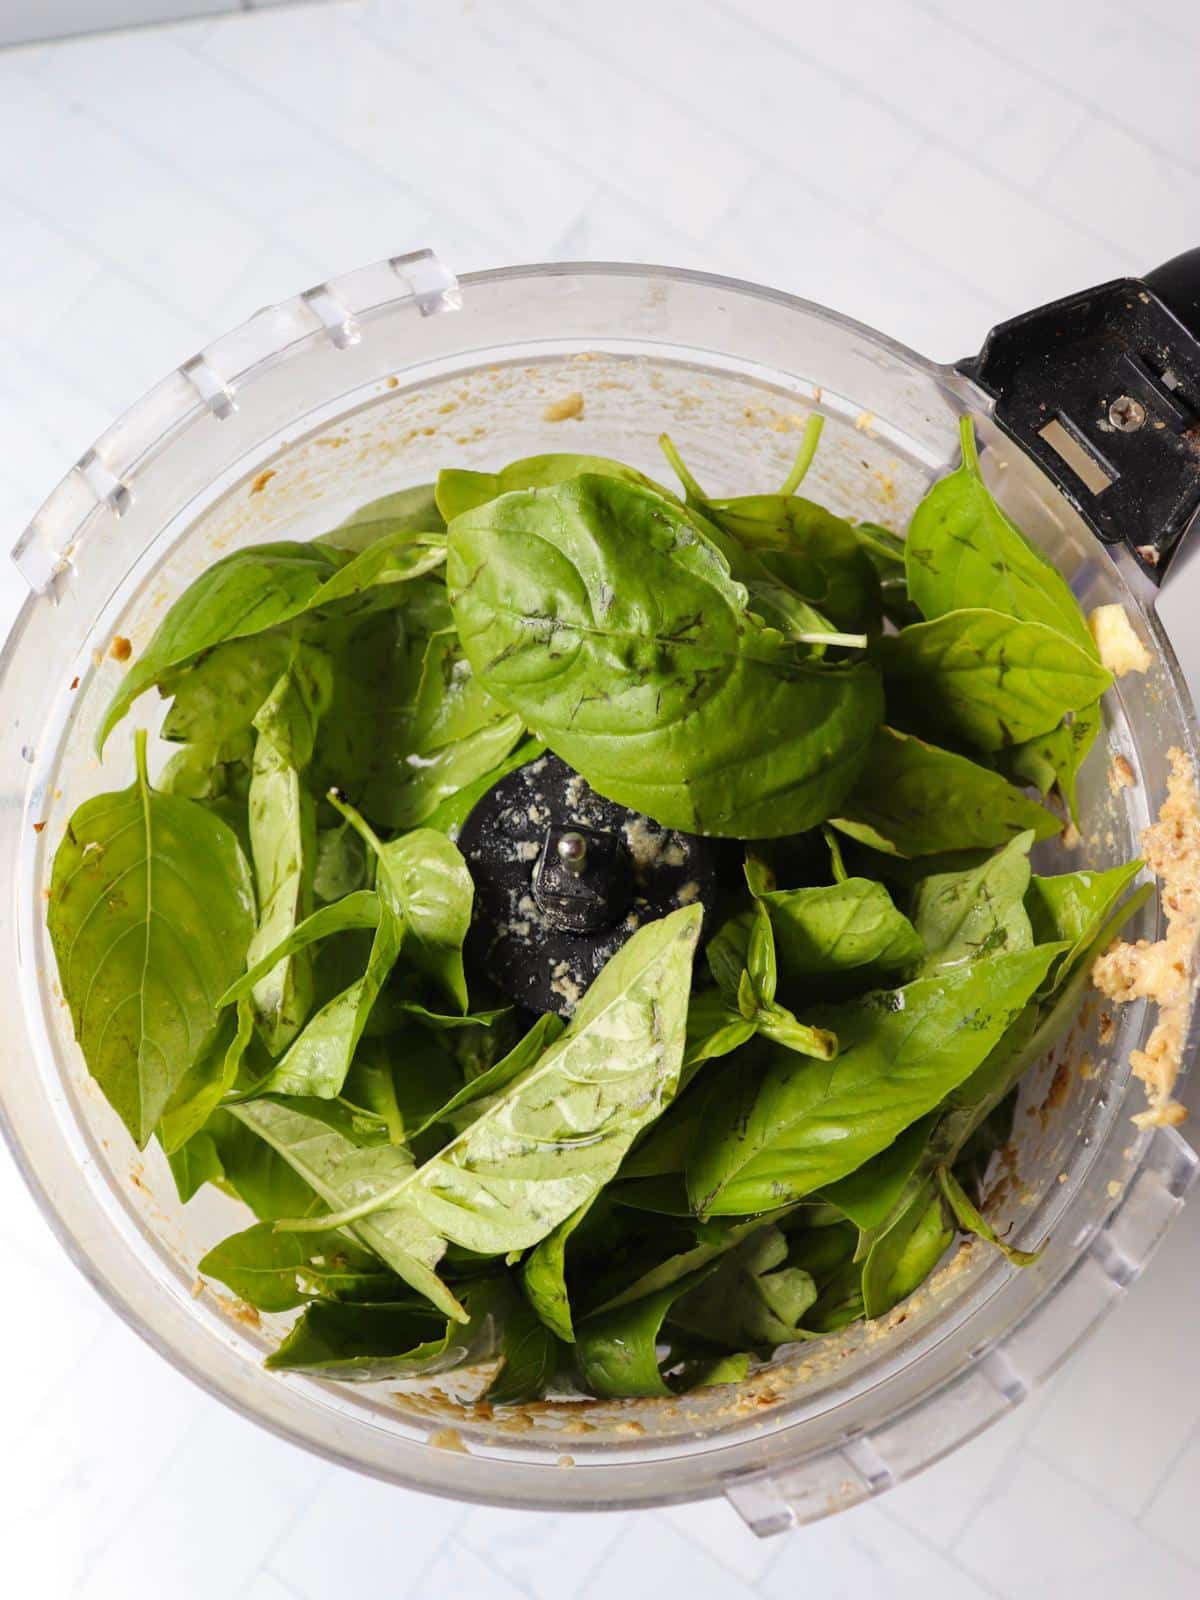 Fresh basil leaves added to a food processor with blended nuts and seasonings for vegan pesto.